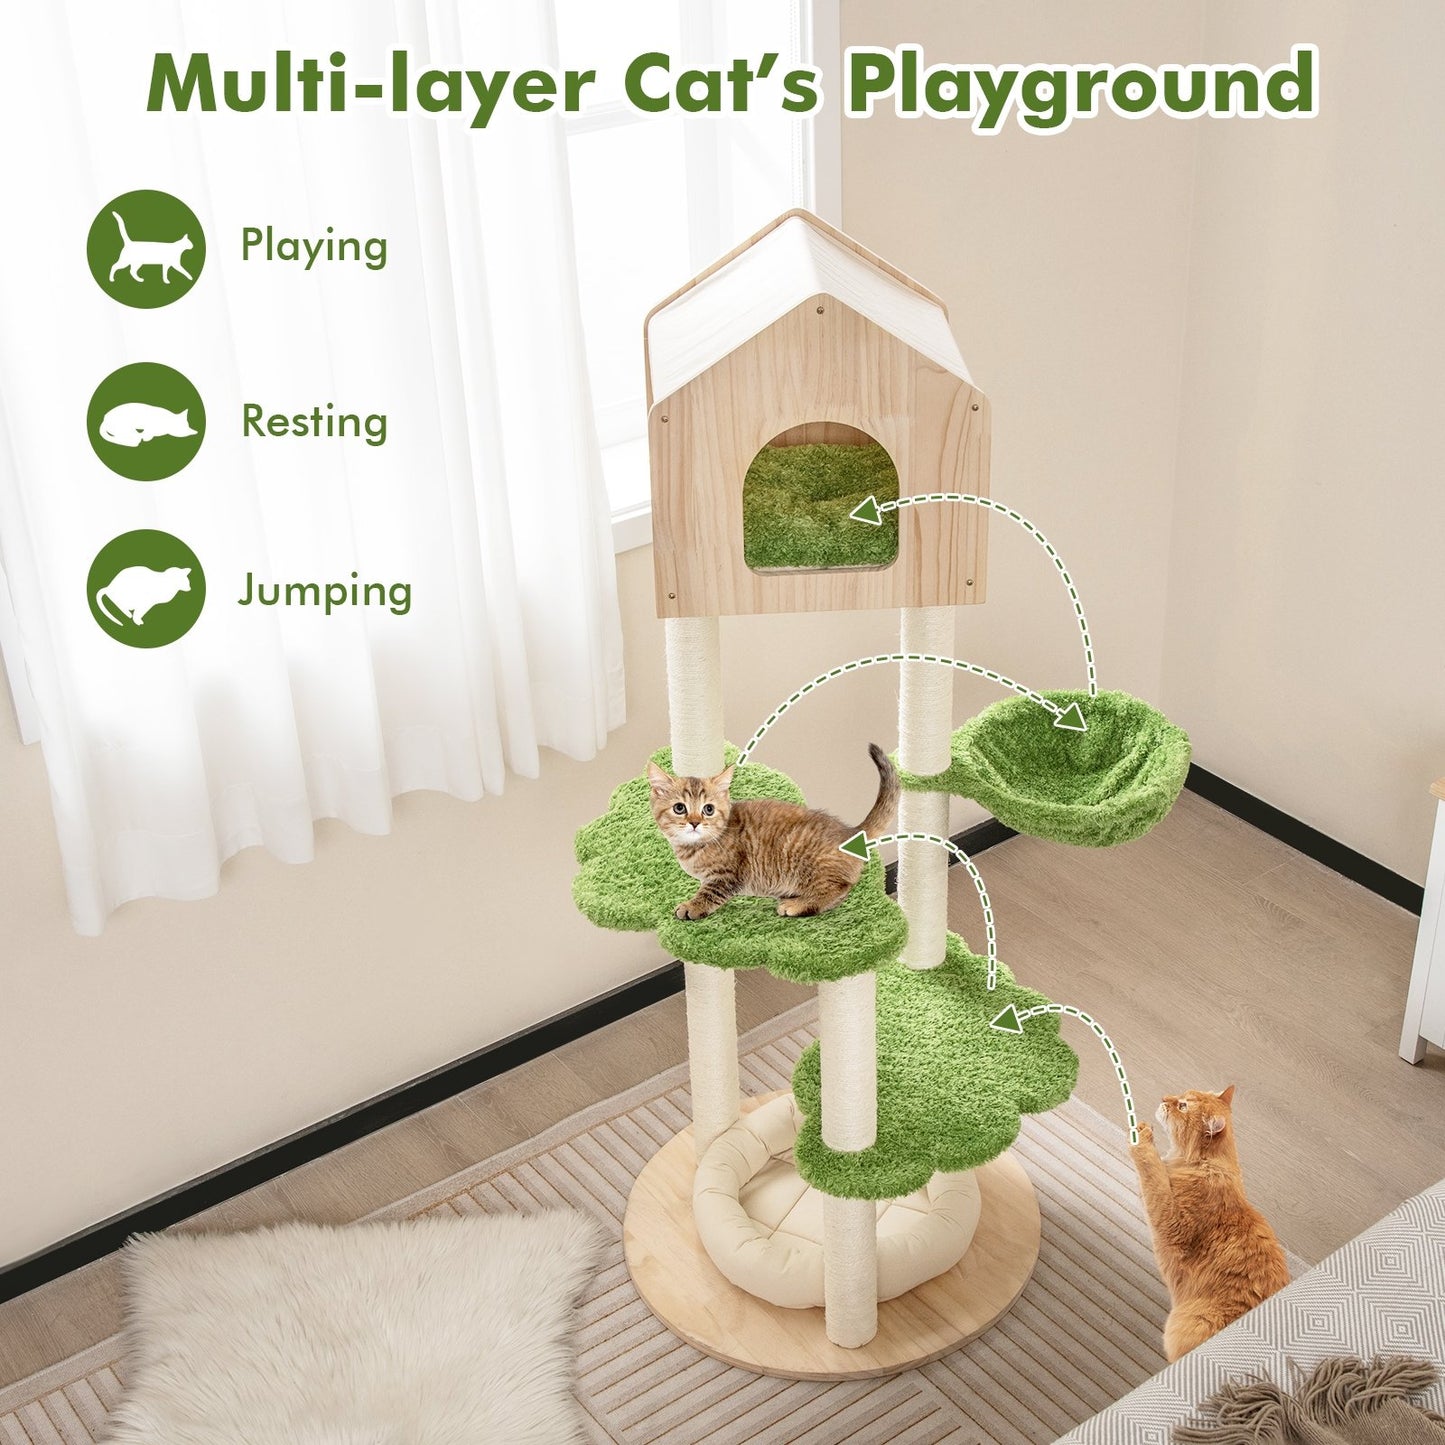 55 Inch Tall Cat Climbing Stand with Sisal Scratching Posts and Soft Cat Bed for Indoor Kittens, Green